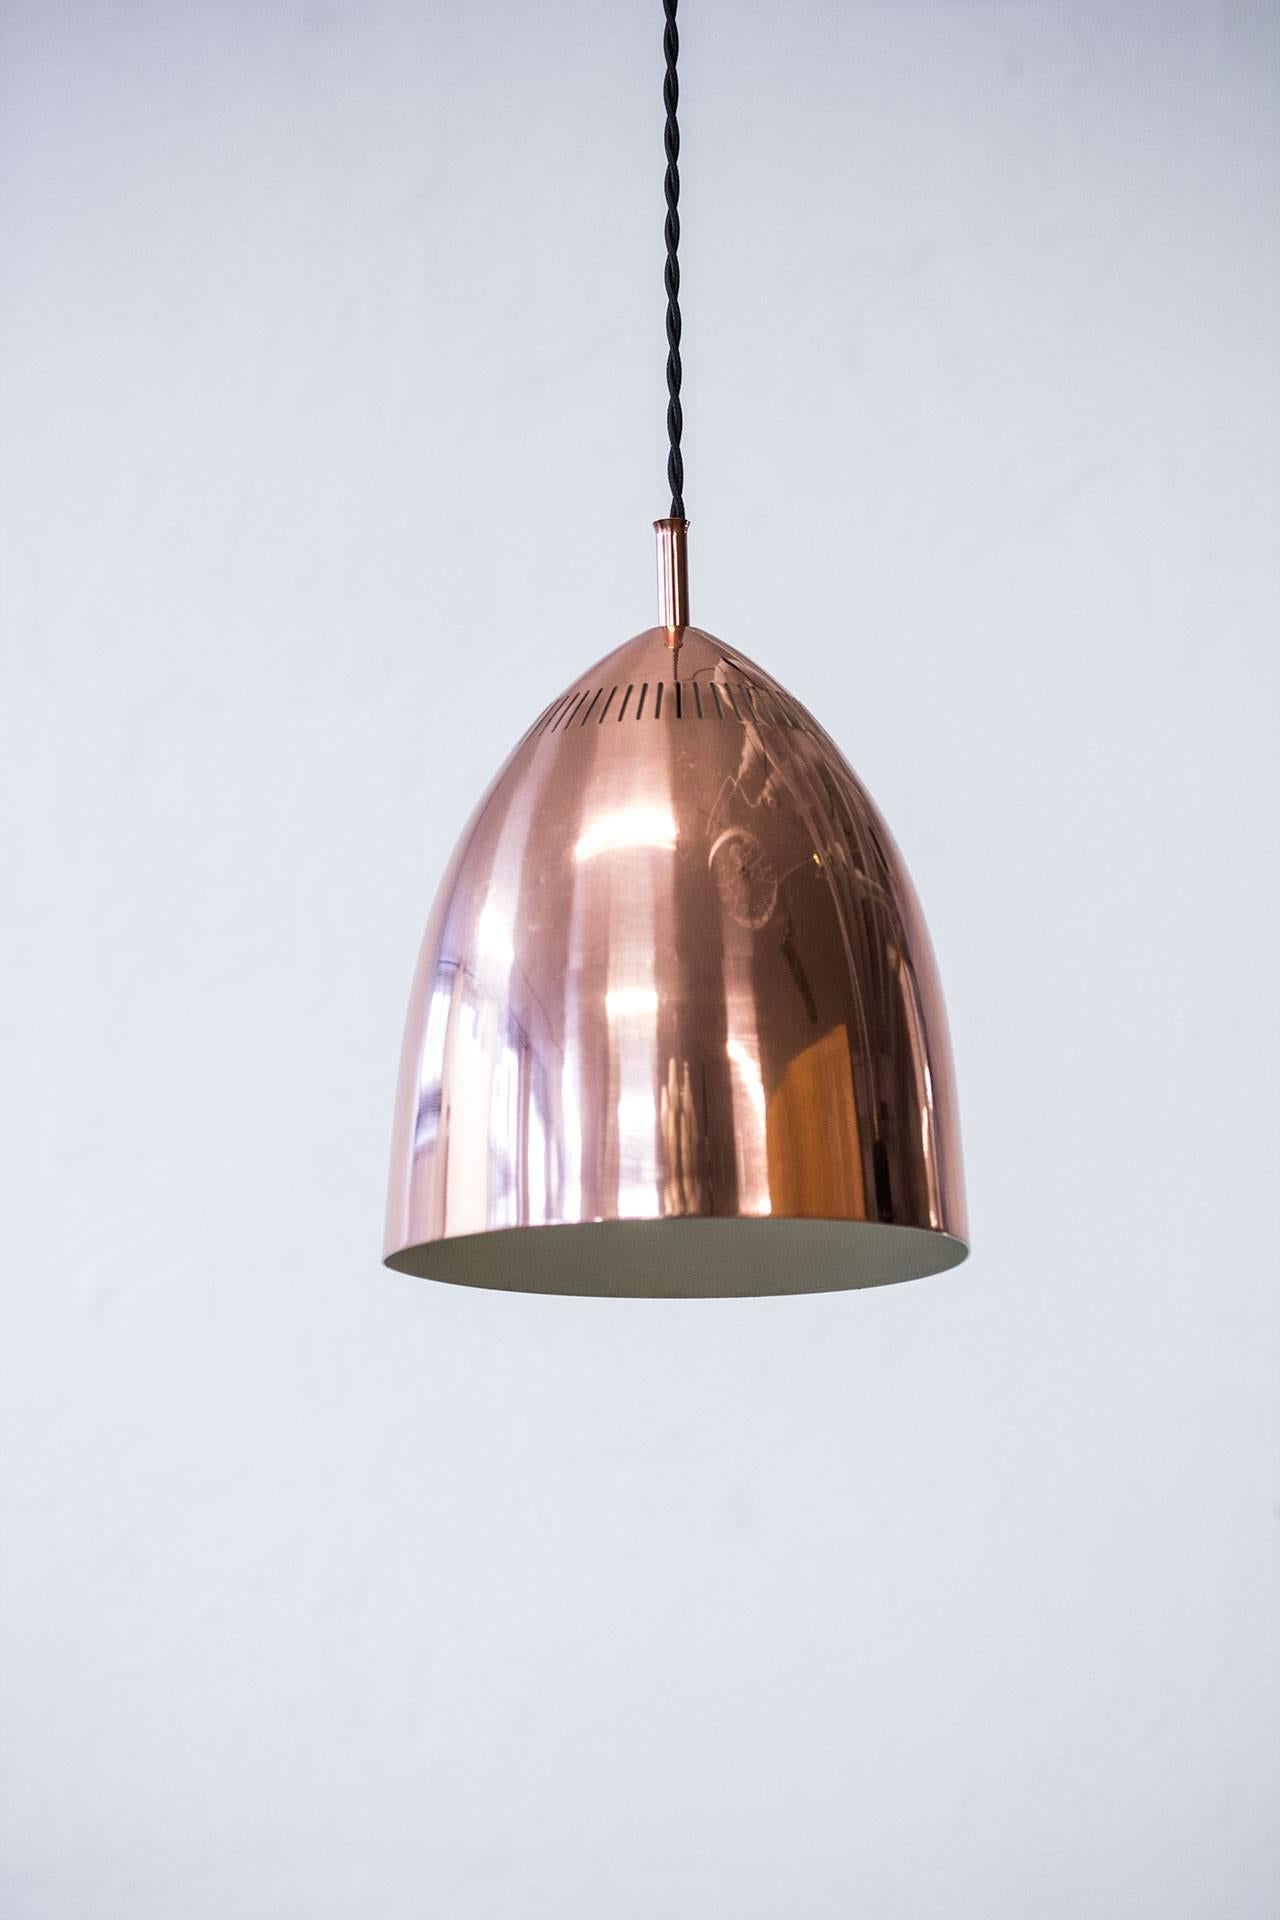 Copper pendant lamp made
by ASEA in Sweden during
the 1960s. Polished copper
on the outside, white lacquer
on the inside. New electricity
with a braided black fabric
chord.